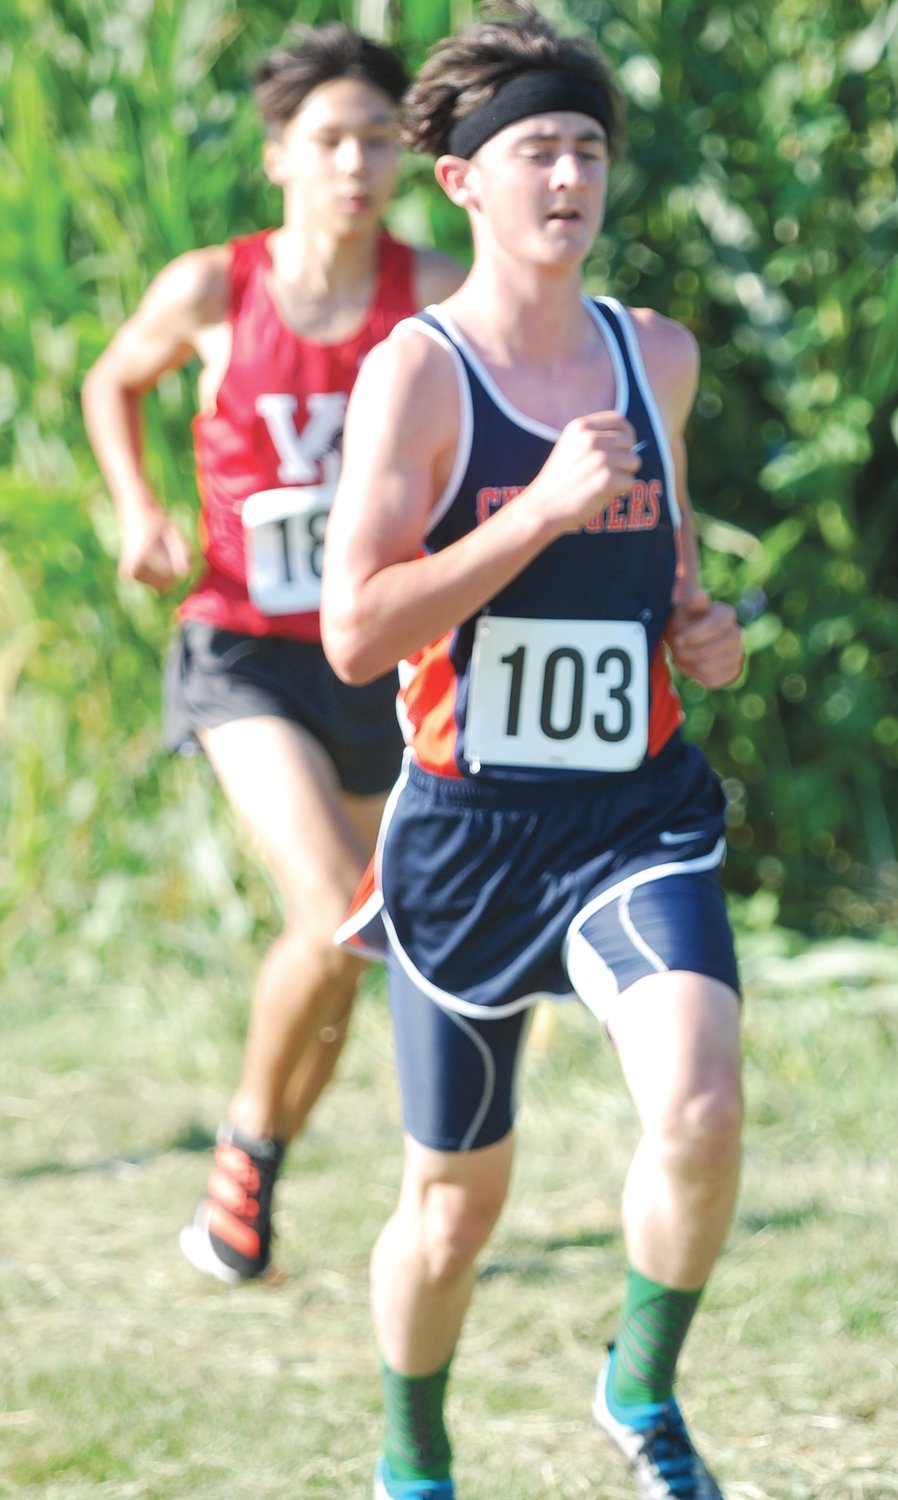 North Montgomery's Elijah McCartney paced the Chargers with a 25th place finish in a time of 18:08.